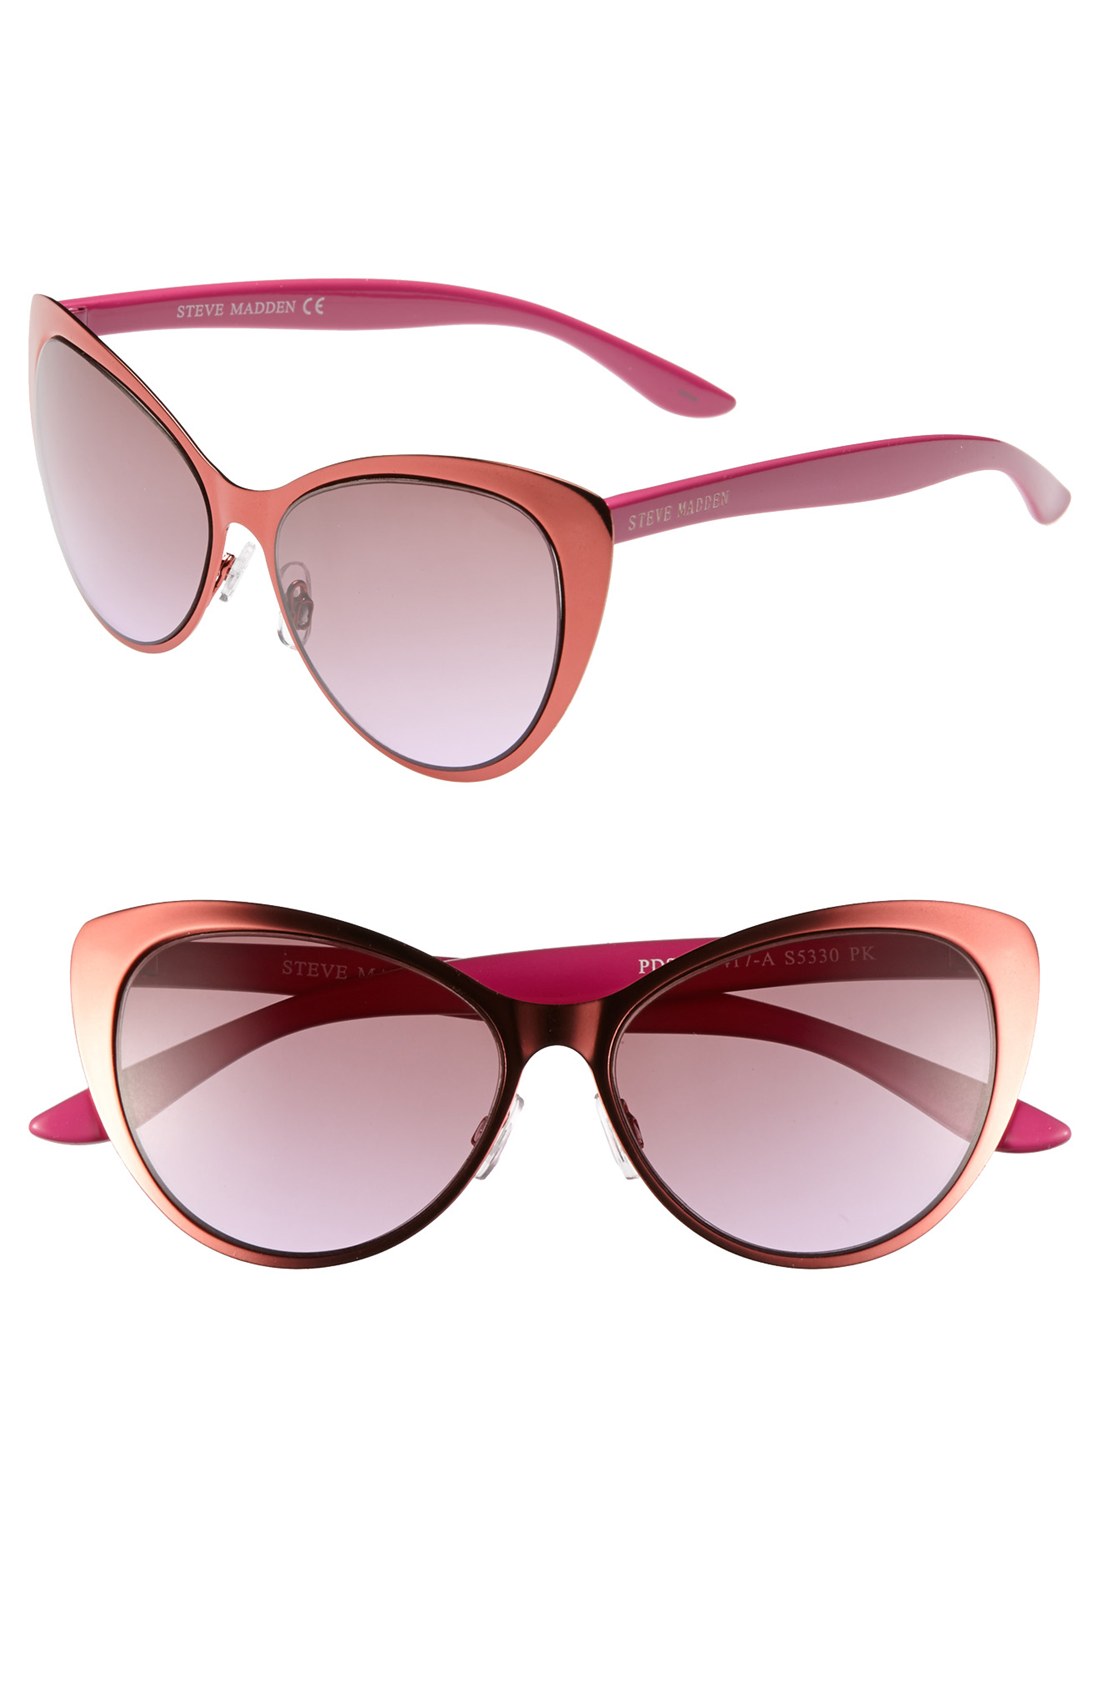 Steve Madden Extreme Cats Eye Sunglasses in Pink (Fuchsia) | Lyst